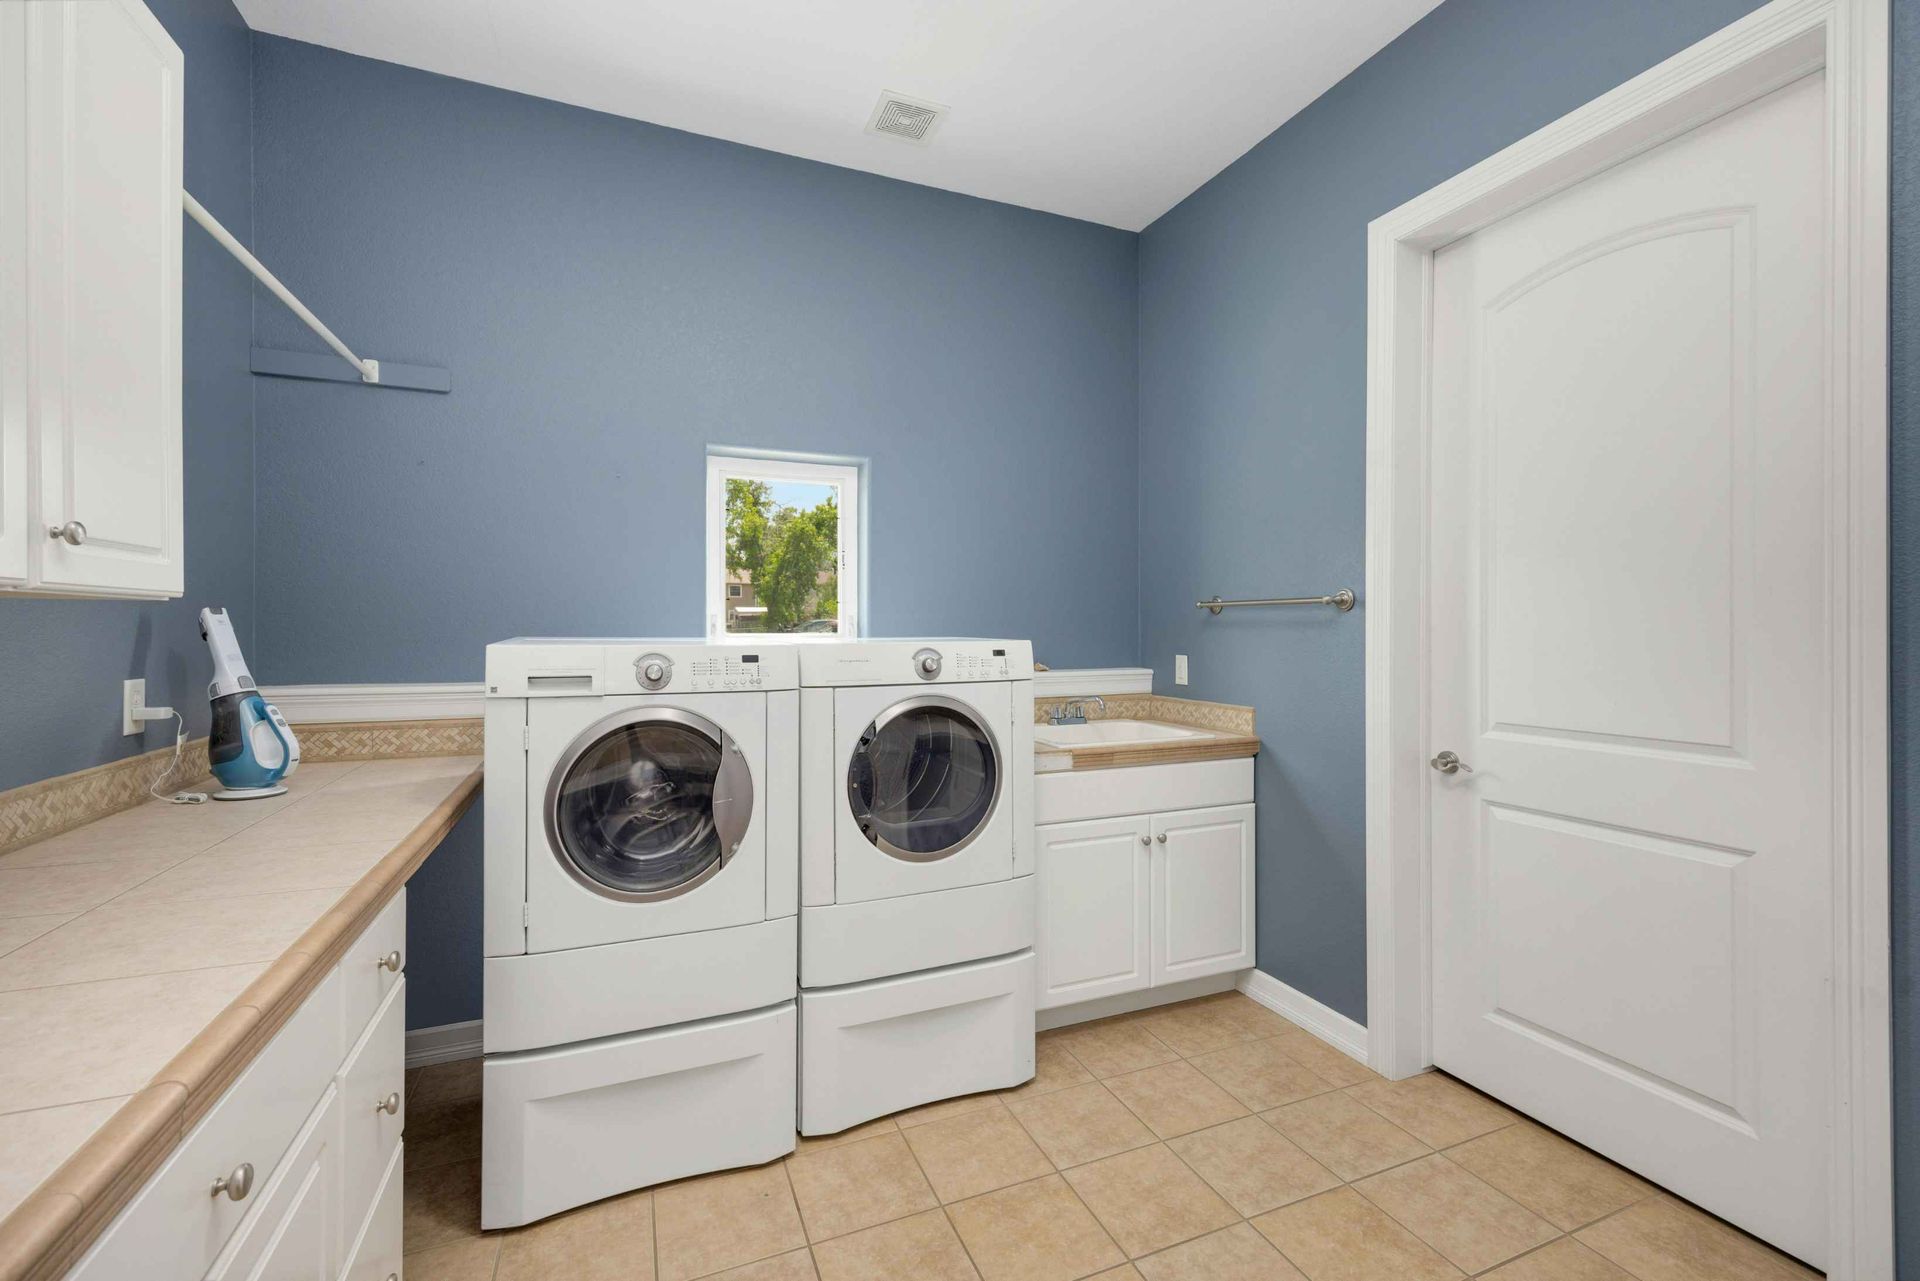 Newly renovated laundry room in a residential property in Wollongong NSW.